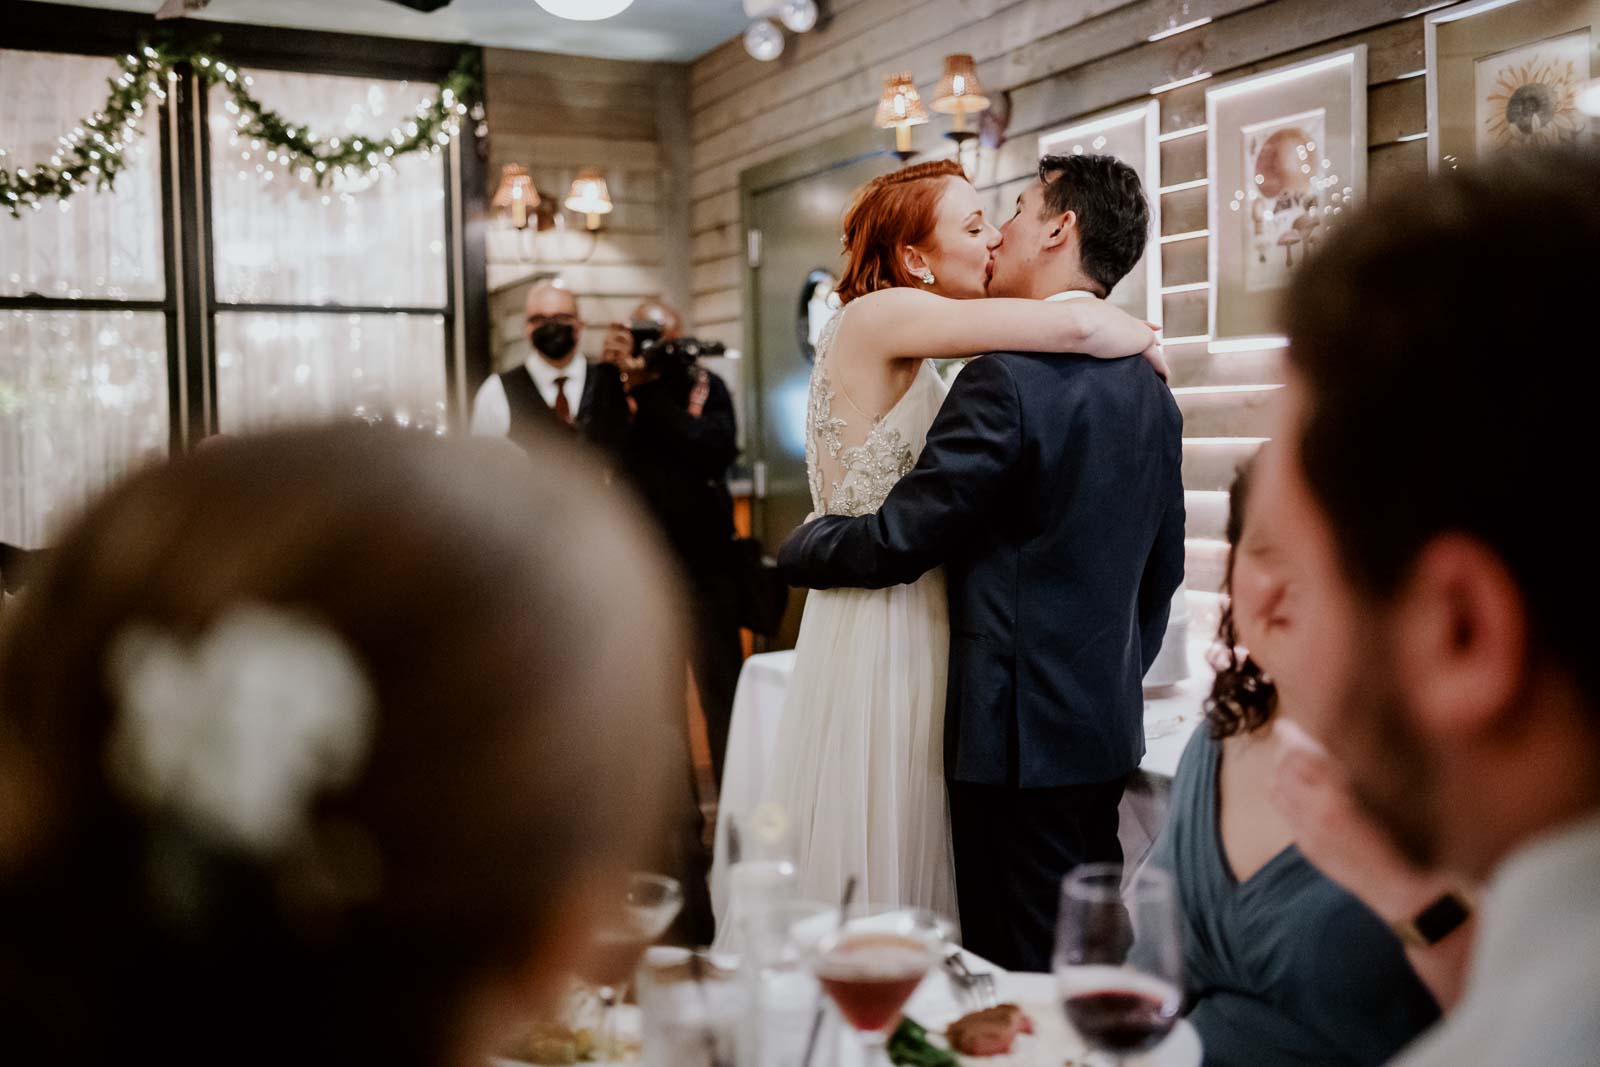 The couple kiss and embrace at Ouisie's Table wedding reception in Houston captured between guests at their tables